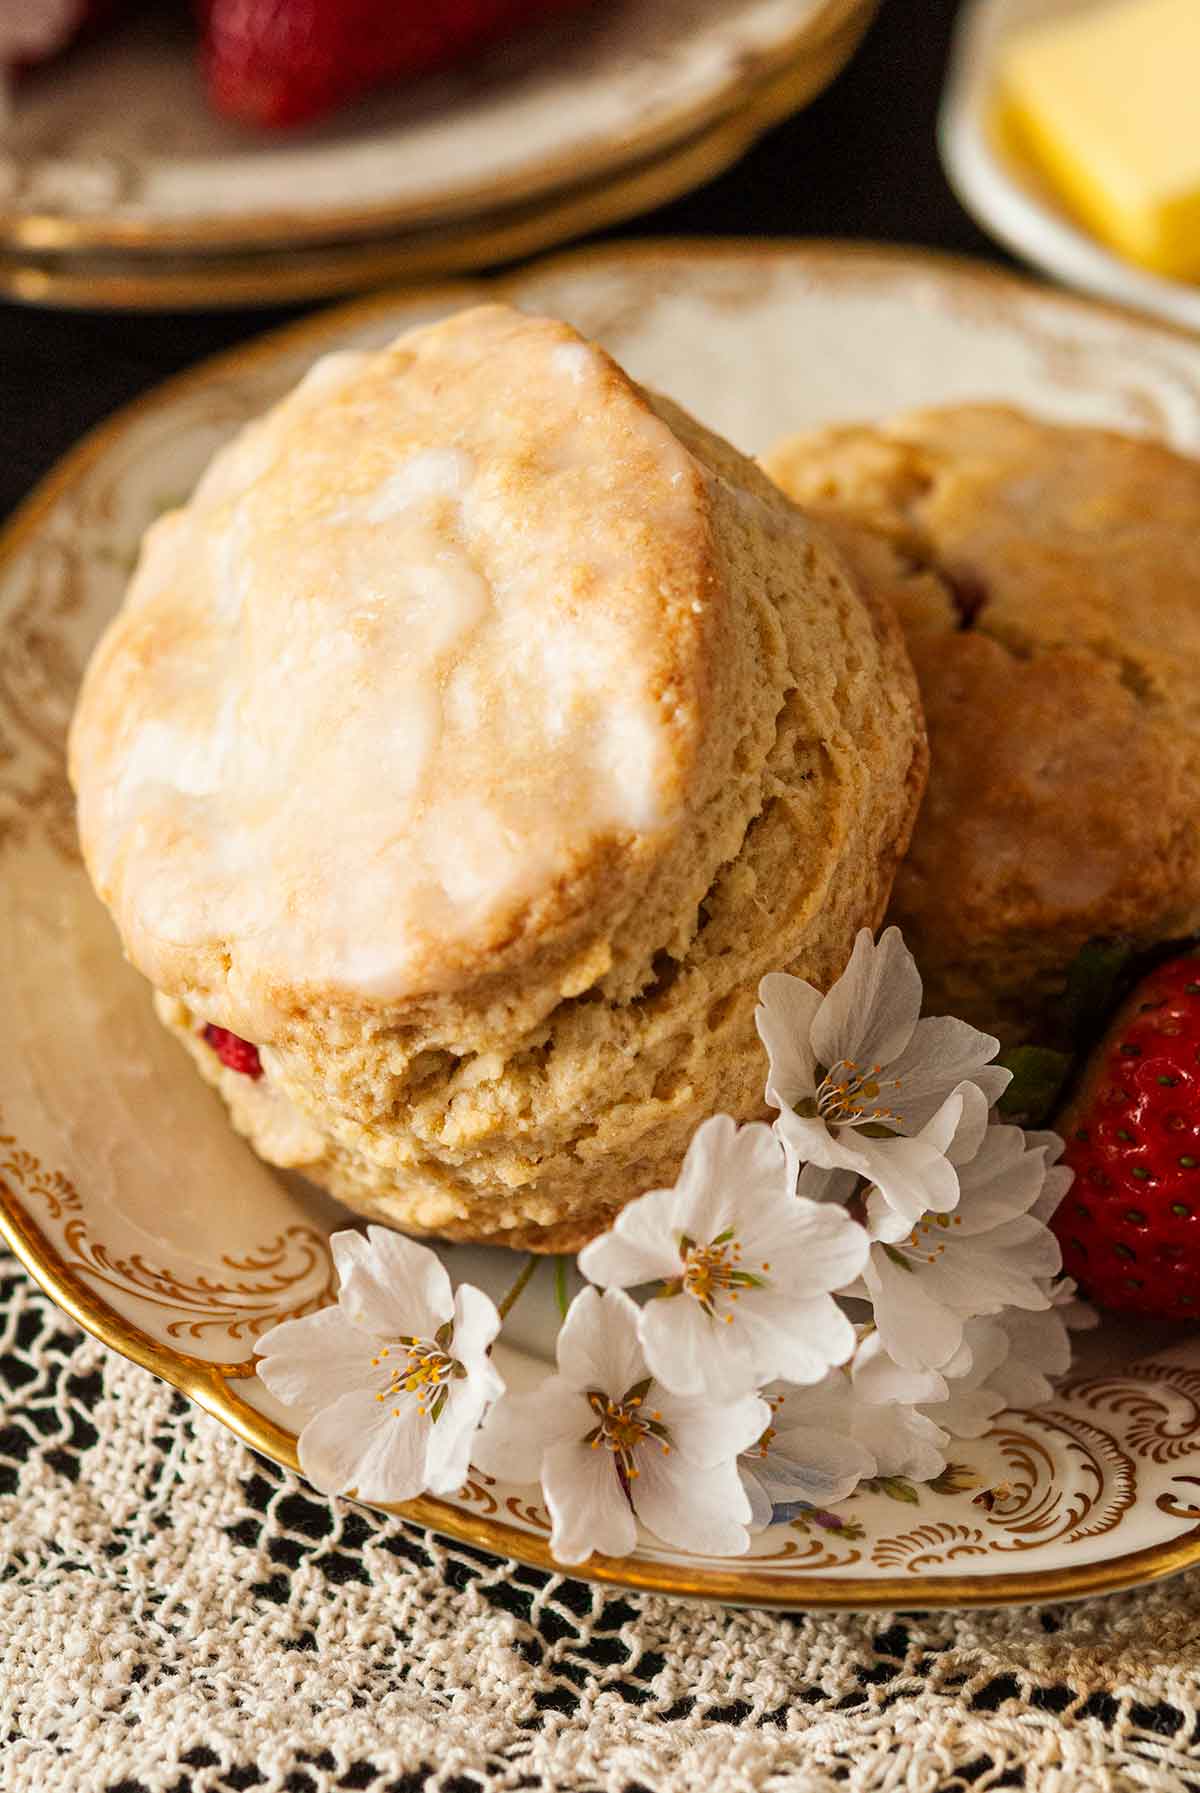 The glaze on one of 2 scones on a plate with flowers.